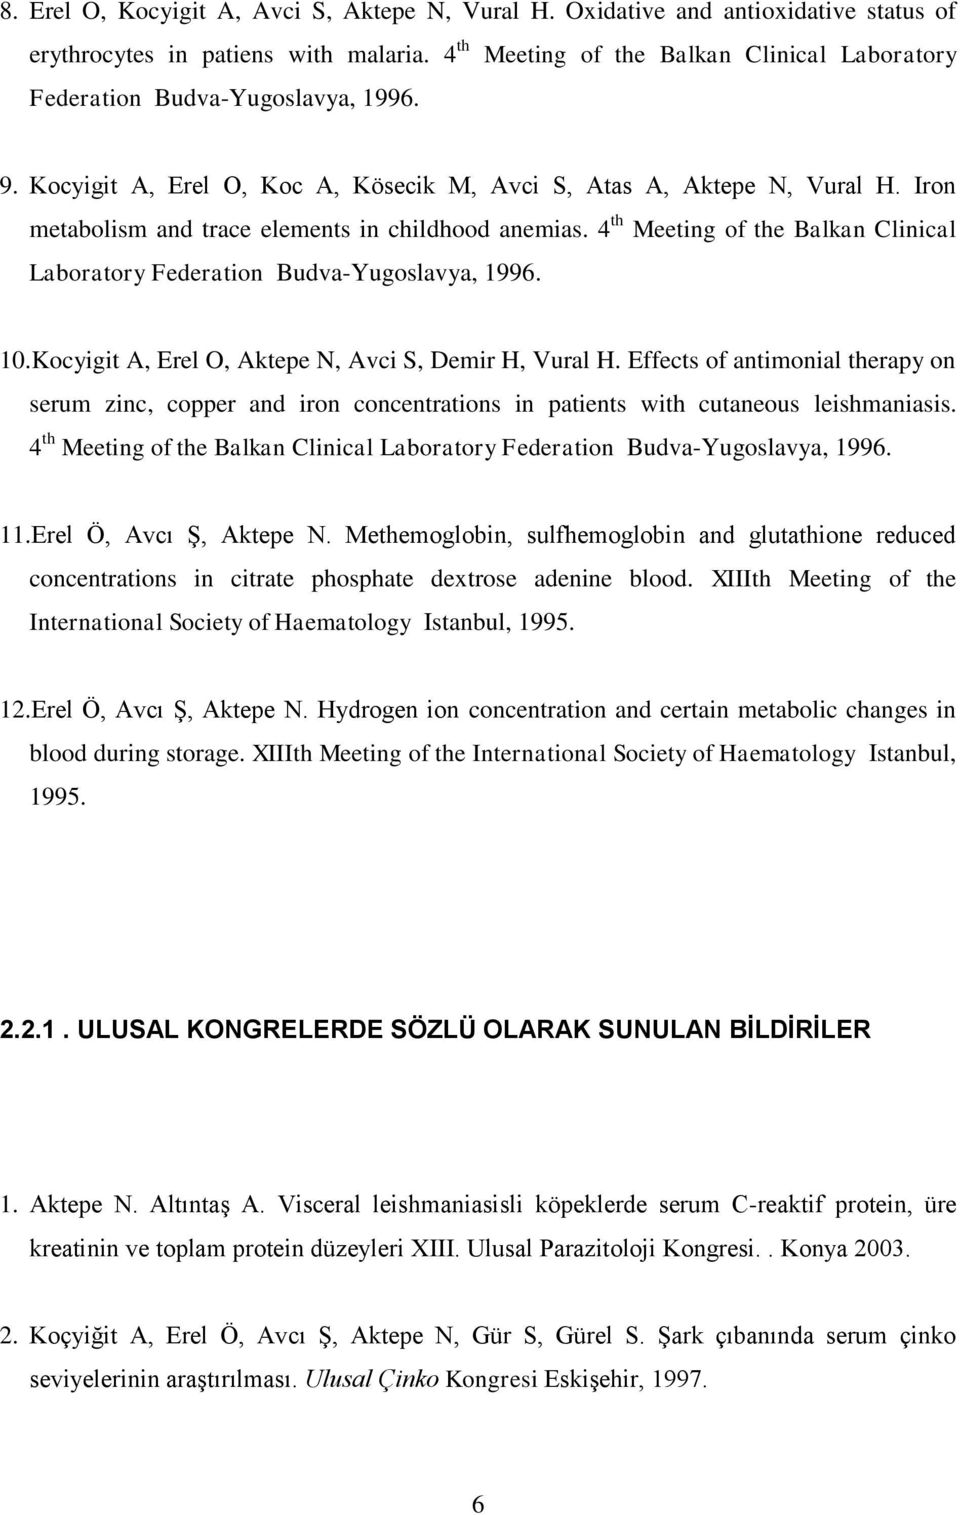 Iron metabolism and trace elements in childhood anemias. 4 th Meeting of the Balkan Clinical Laboratory Federation Budva-Yugoslavya, 1996. 10.Kocyigit A, Erel O, Aktepe N, Avci S, Demir H, Vural H.